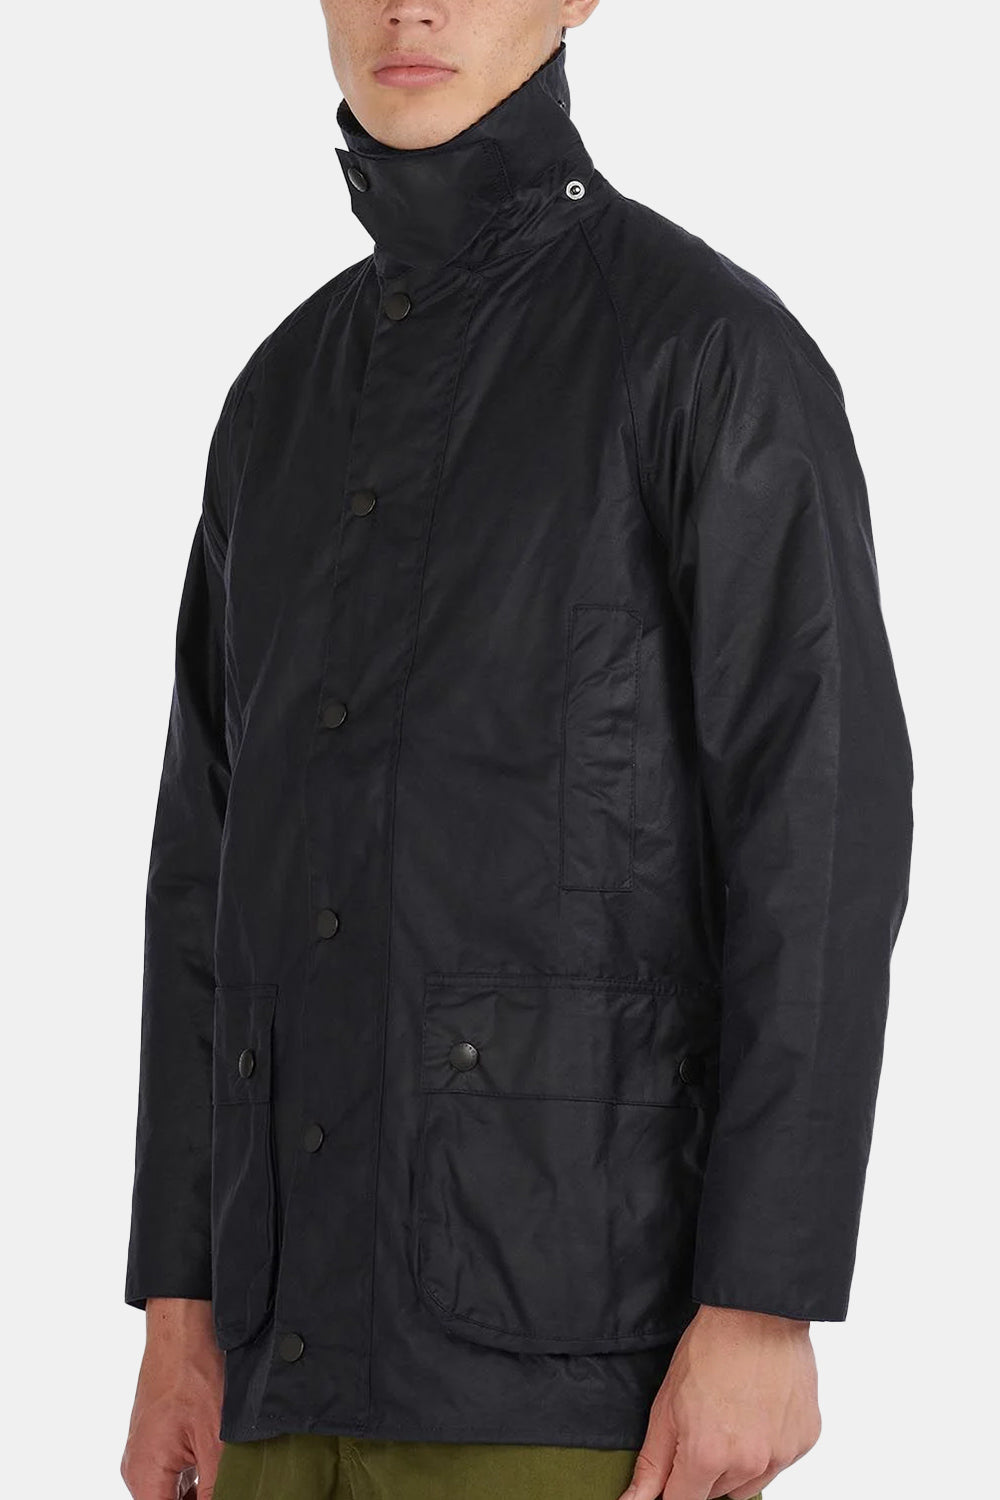 Barbour White Label SL Beaufort Waxed Cotton Jacket (Navy)